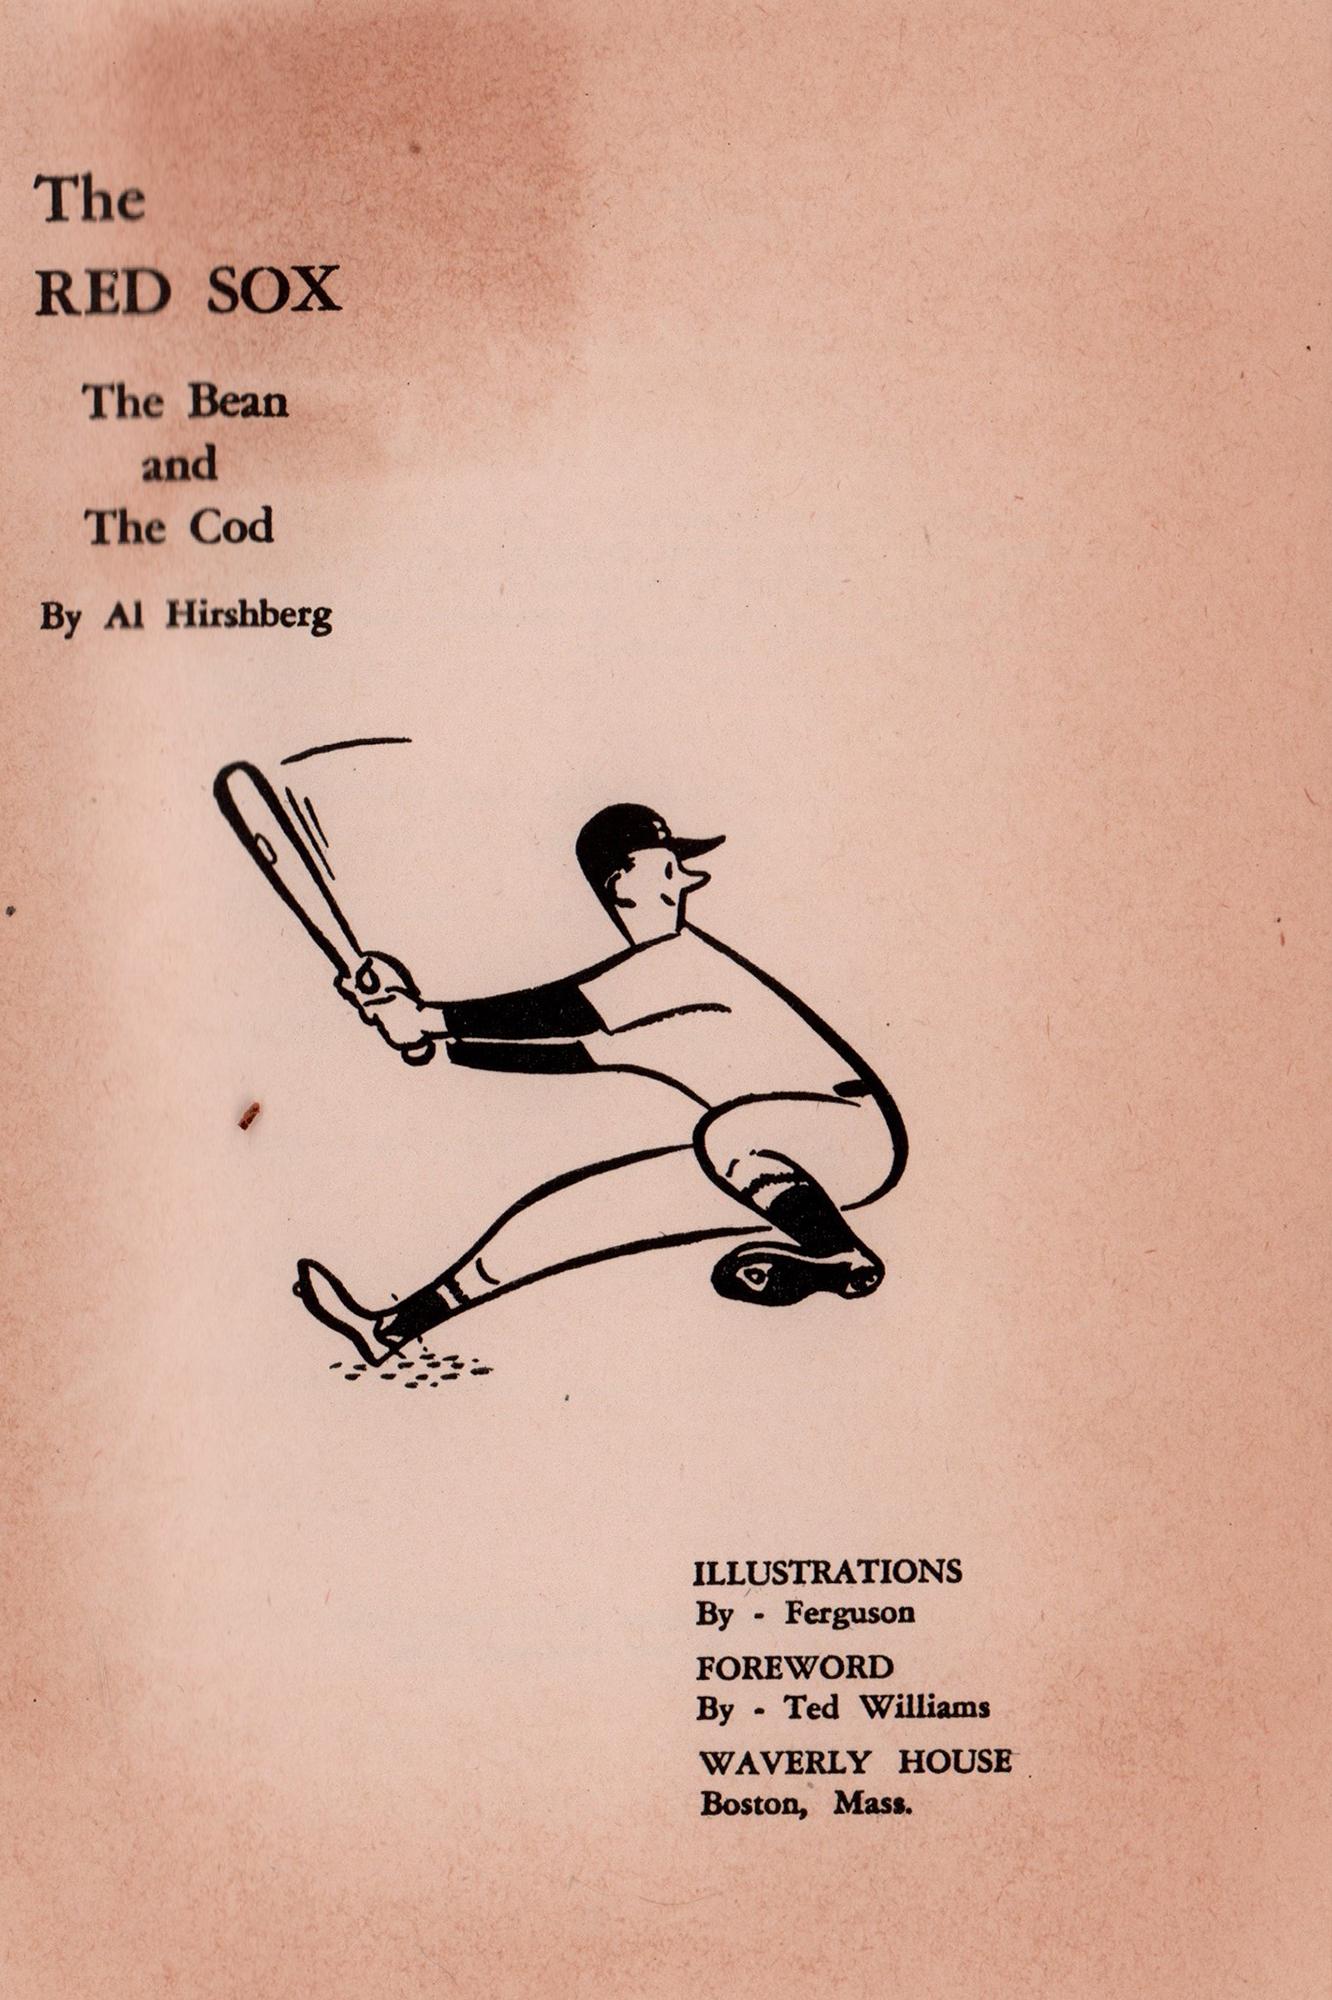 Paper Signed by 1946 Red Sox Team The Red Sox The Bean and The Cod, with LOA